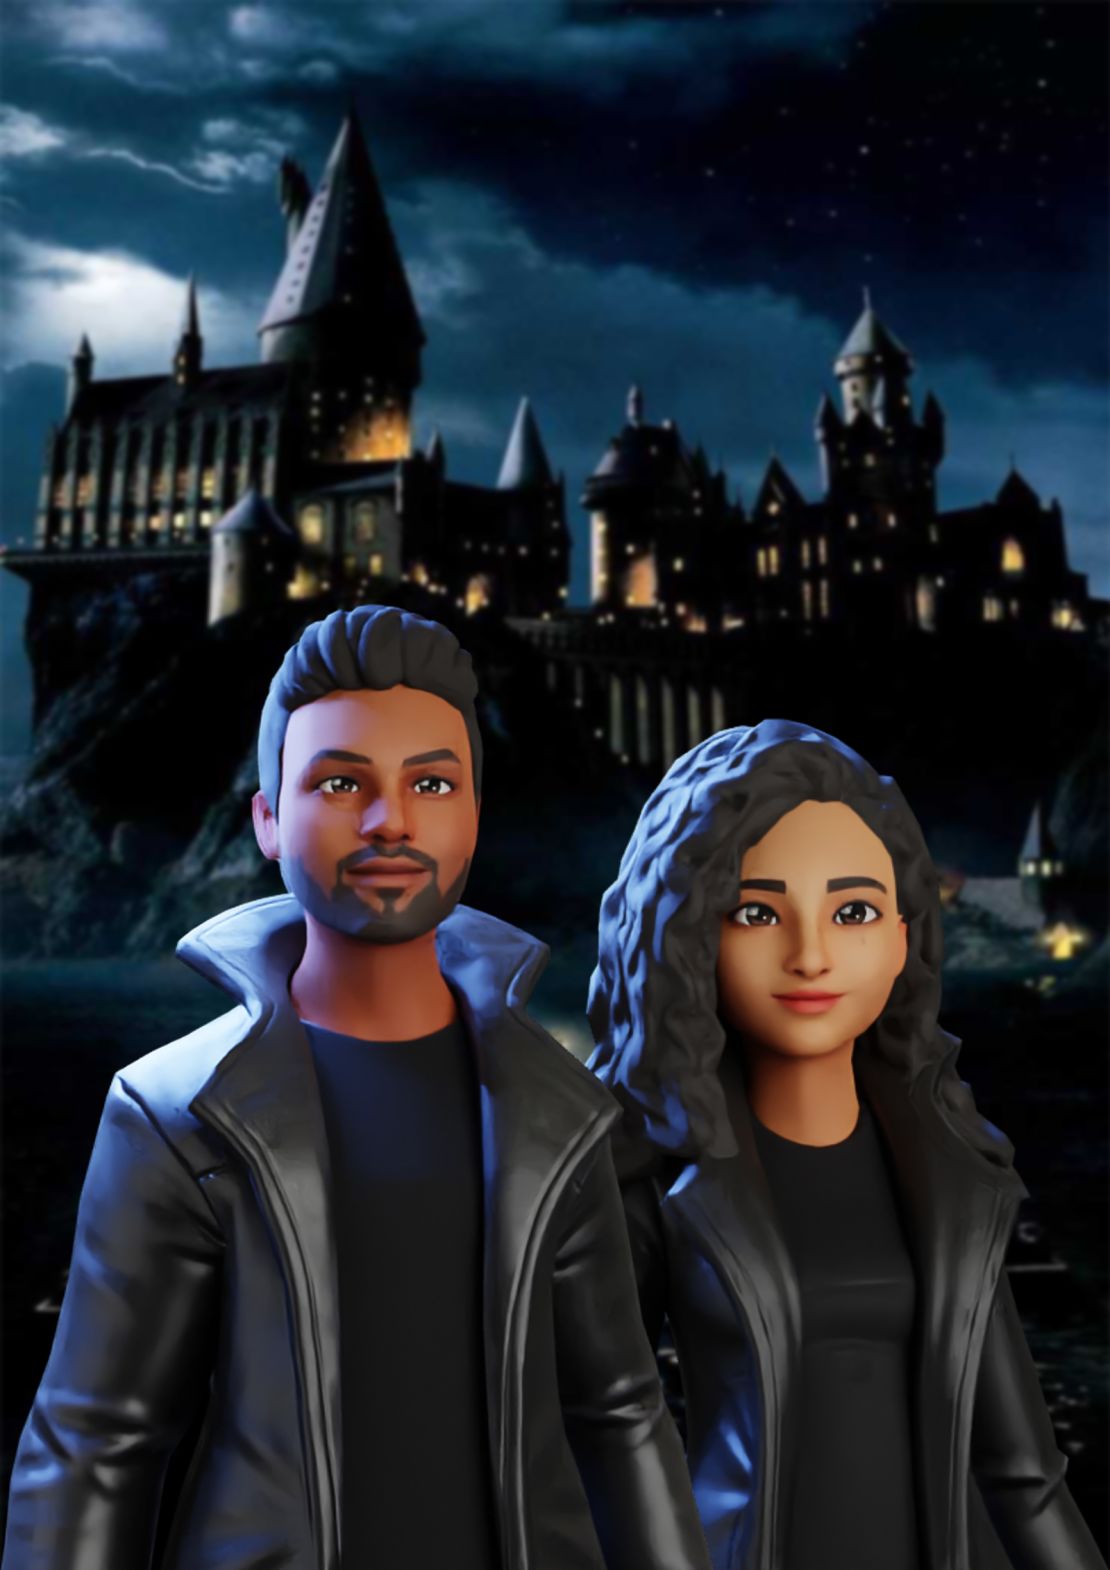 The couple's avatars against a Hogwarts-inspired background. The bridegroom Dinesh Sivakumar Padmavathi (left) said the pair's digital characters will wear more traditional clothing at the event.